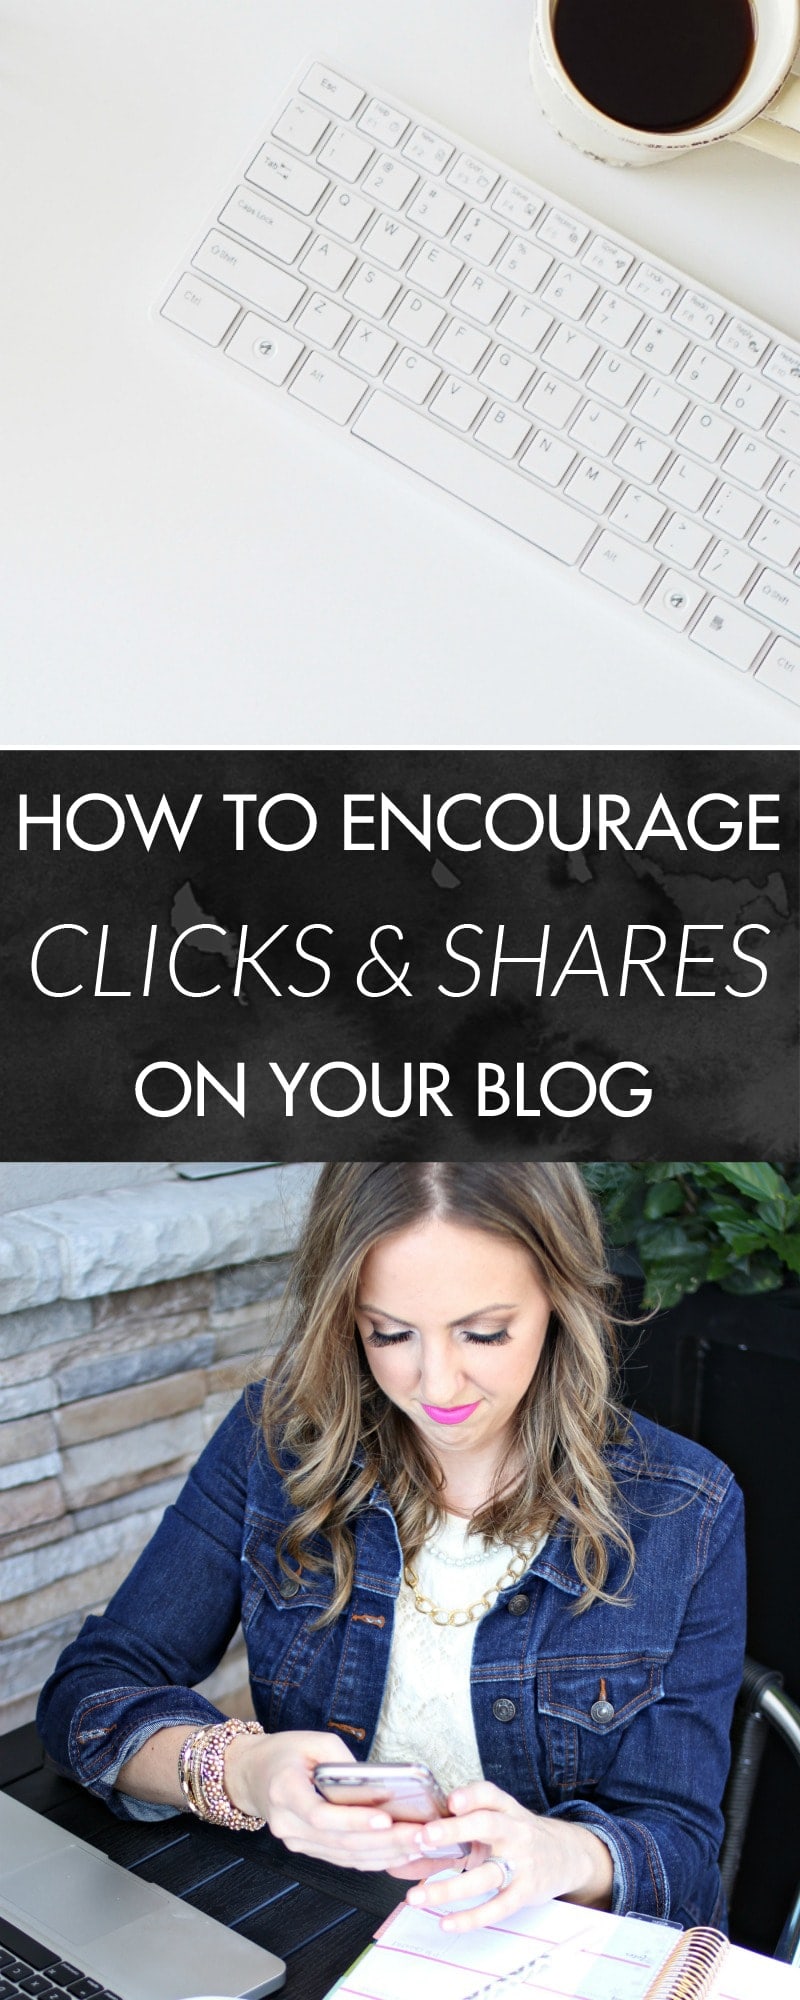 How to Encourage Clicks and Shares on Your Blog - increase your pageviews, lower your bounce rate, and keep visitors on your blog!